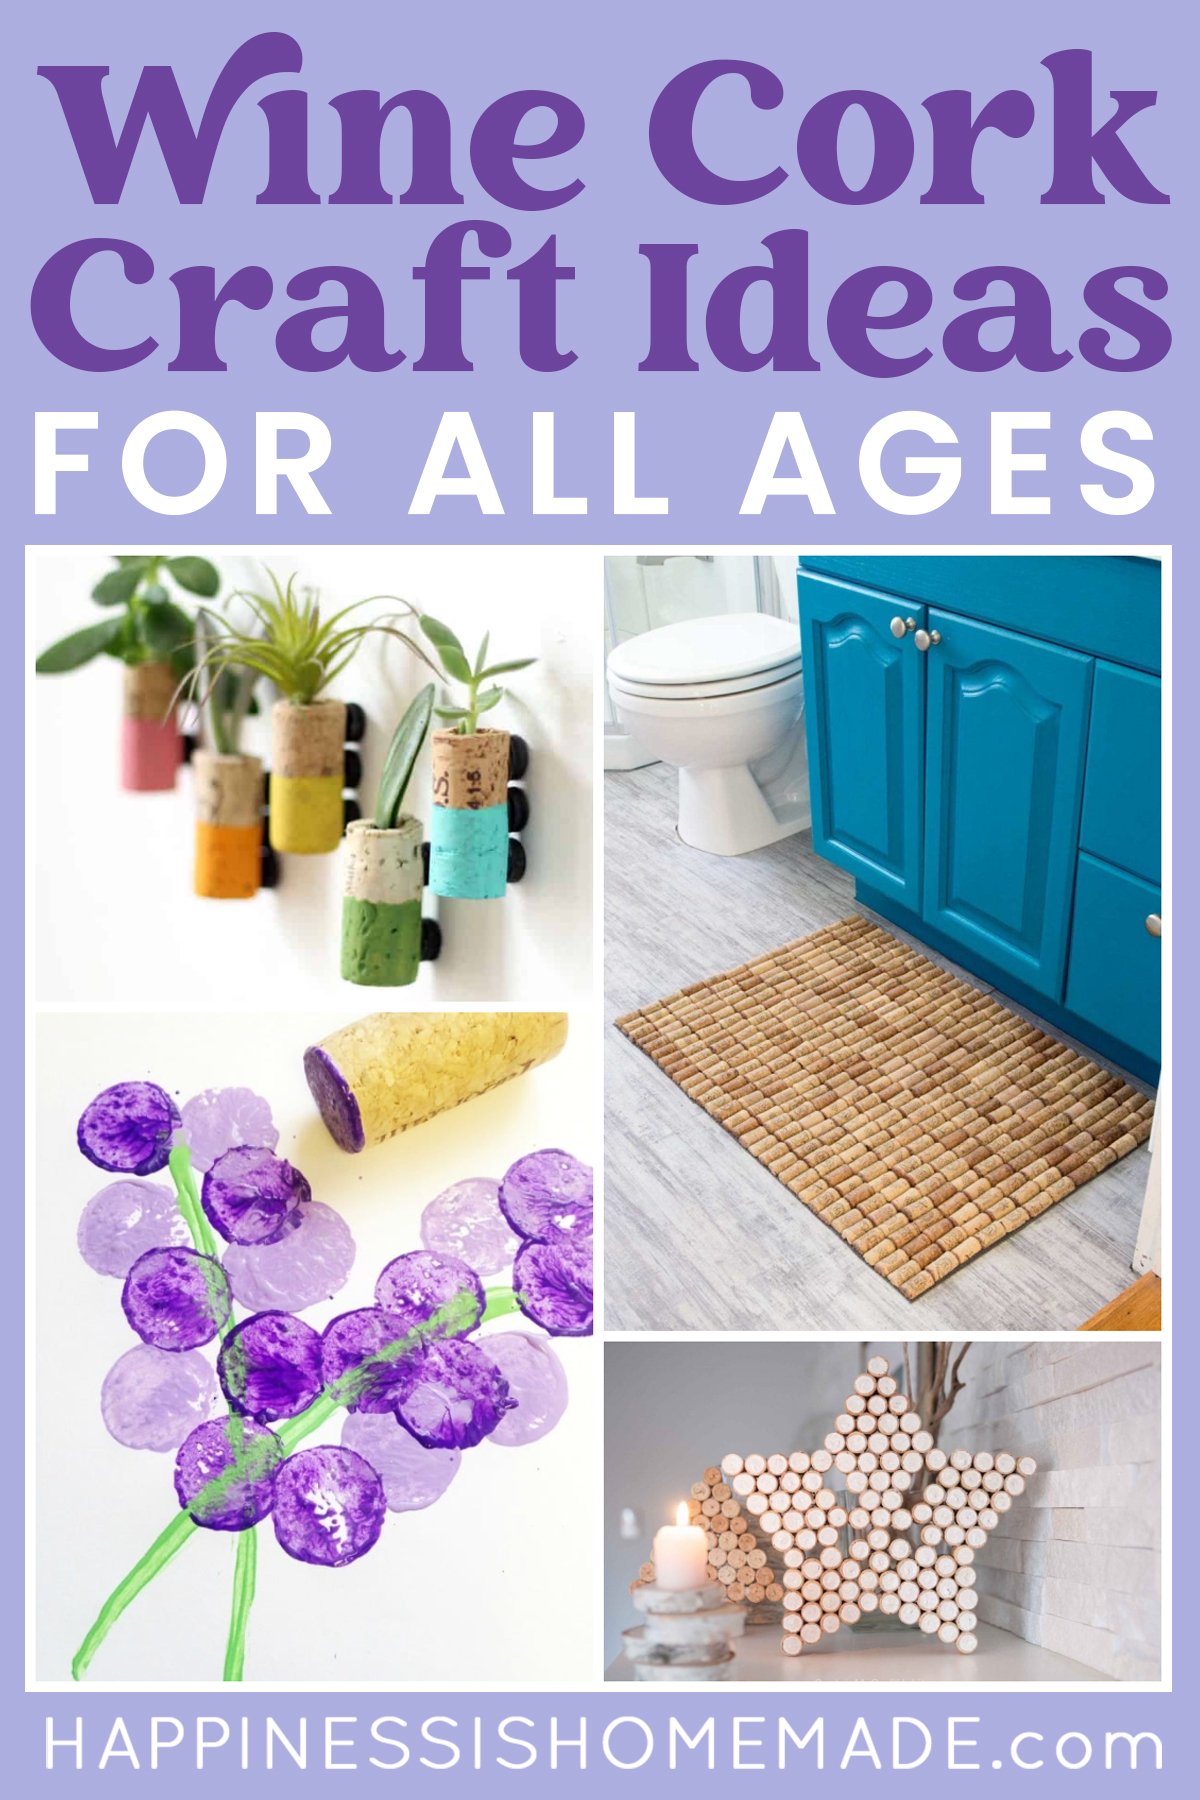 "Wine Cork Craft Ideas" graphic with collage of craft ideas